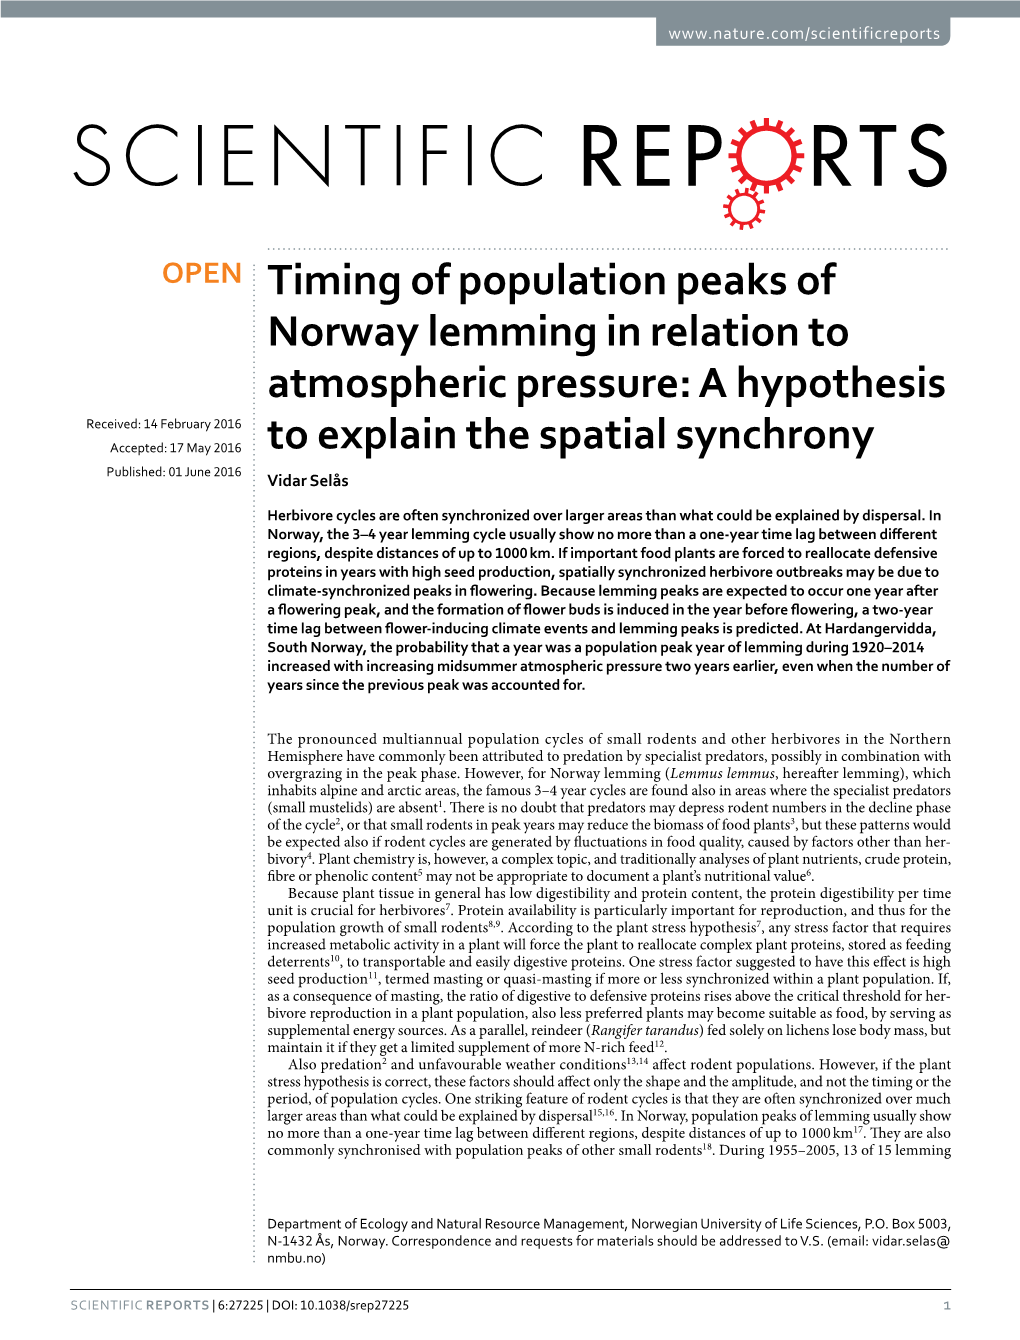 Timing of Population Peaks of Norway Lemming in Relation